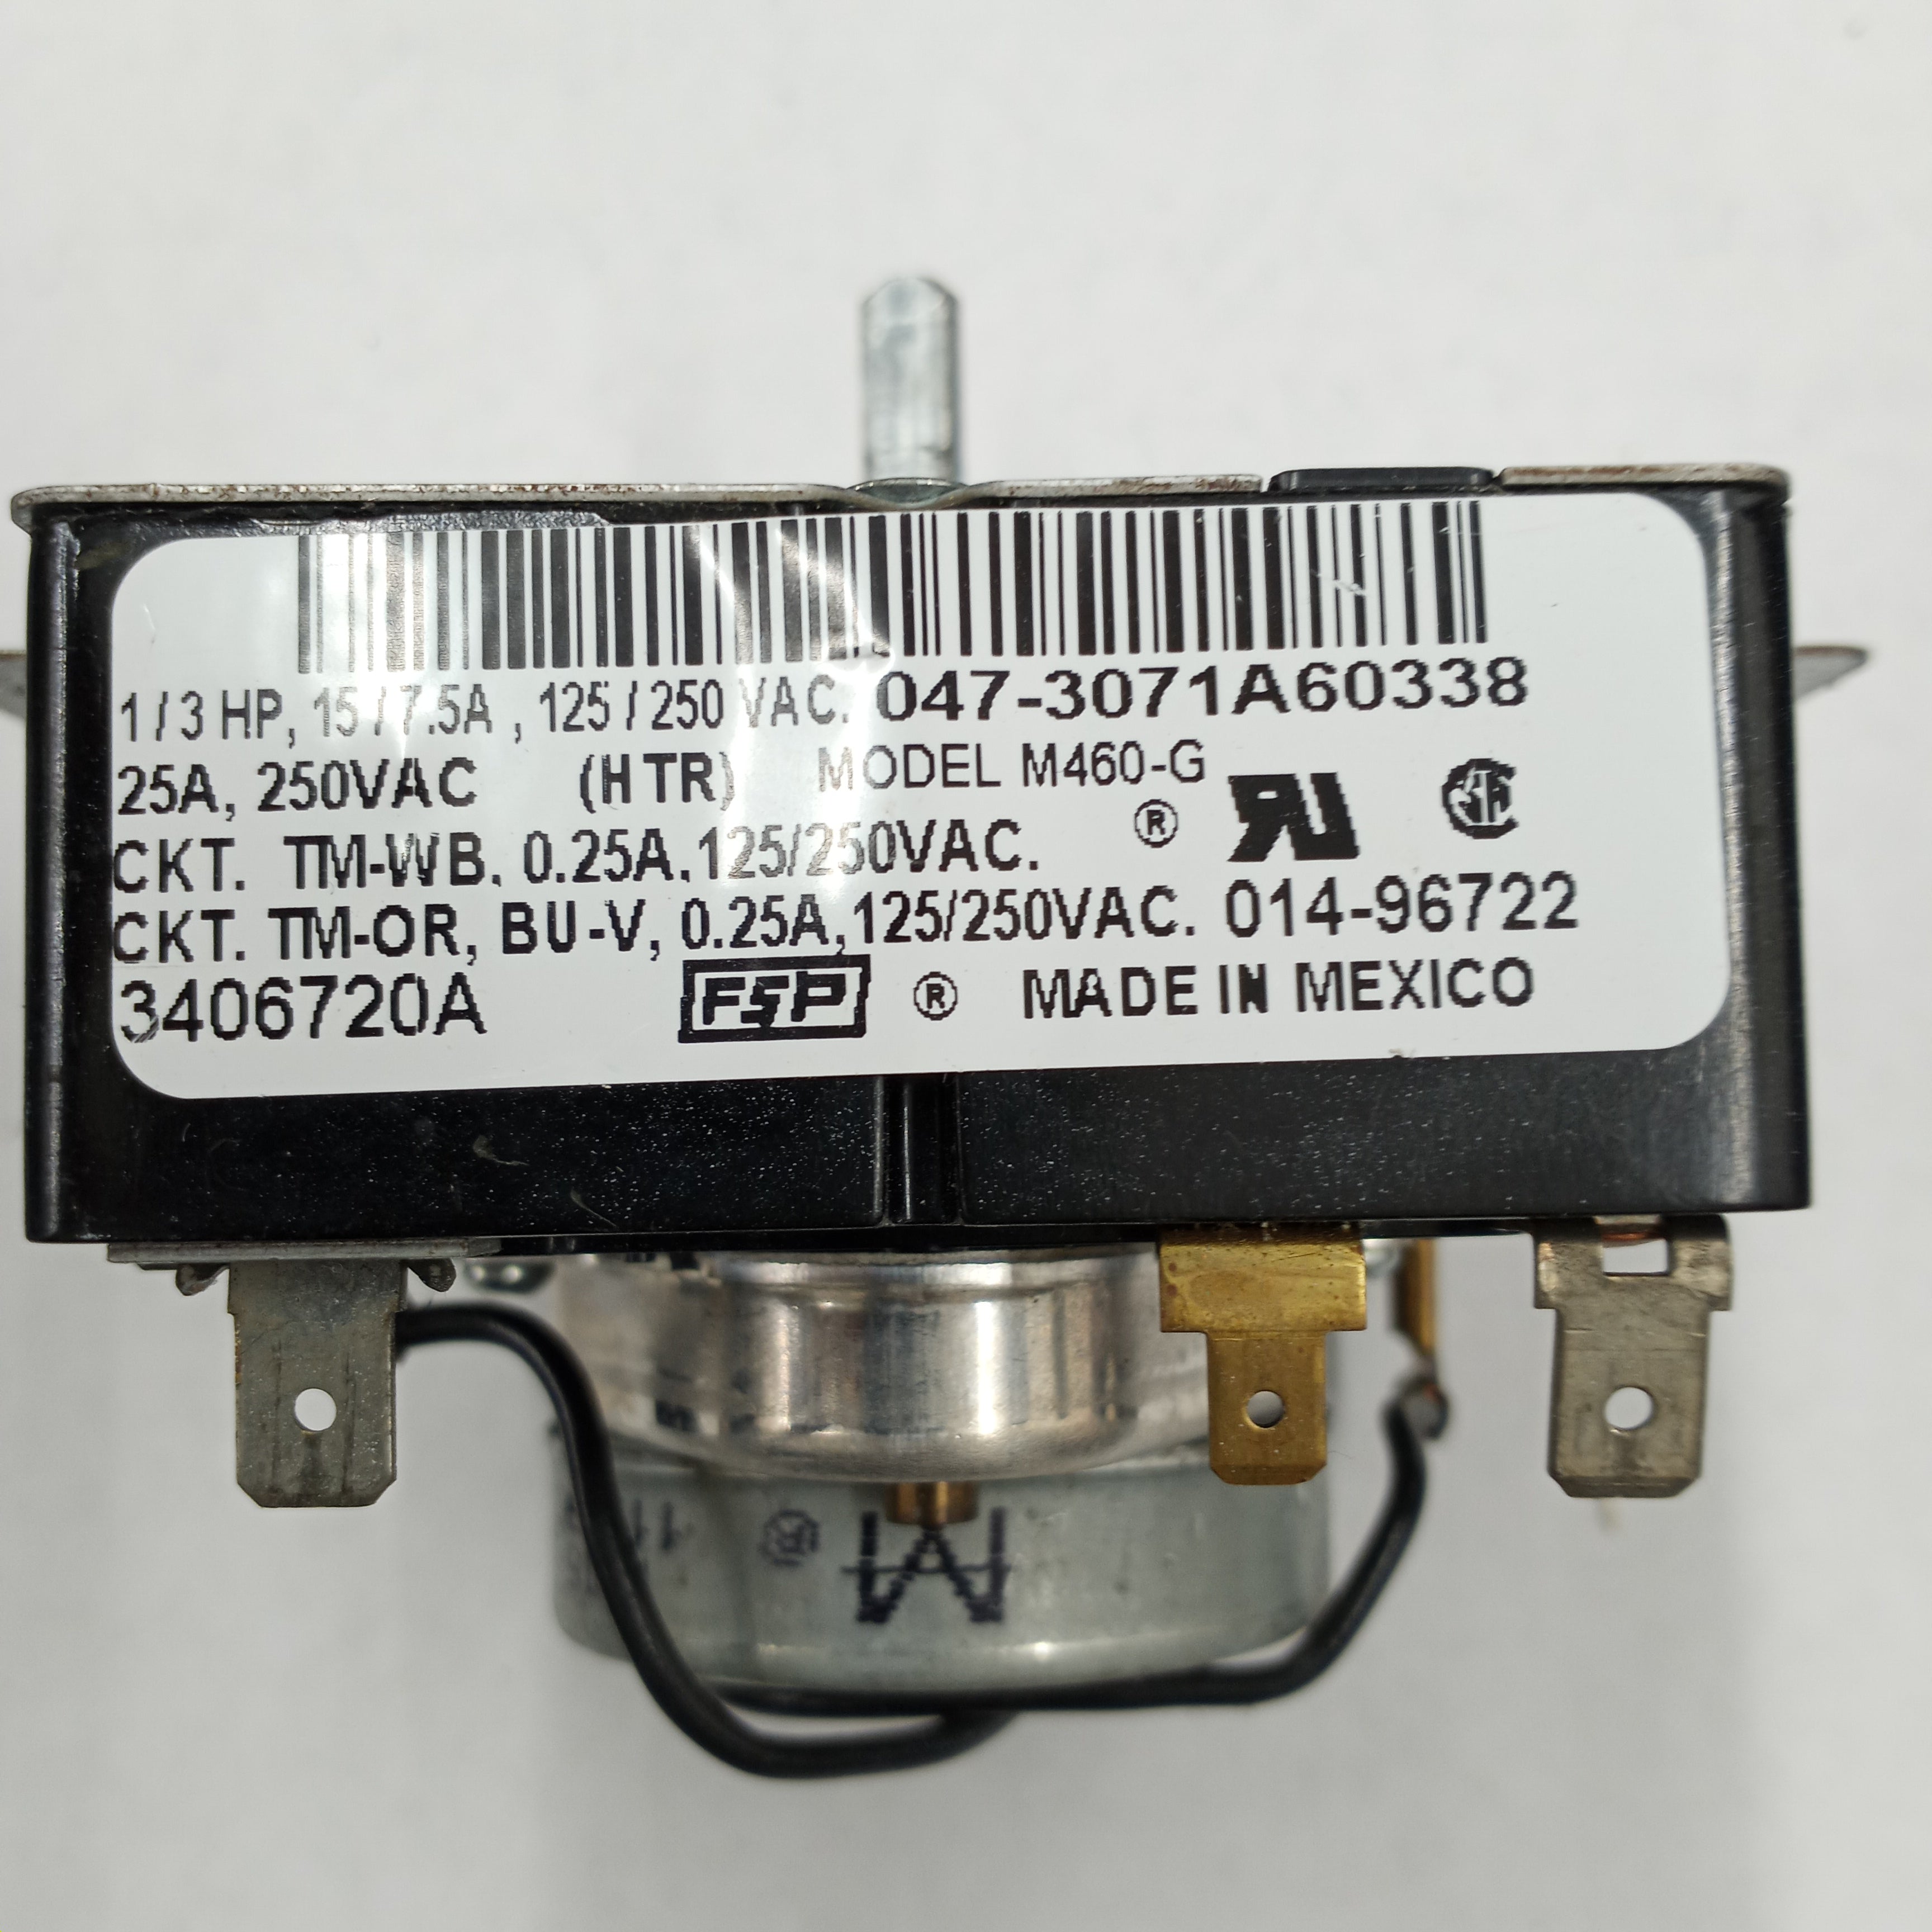 Whirlpool-Dryer-Timer-WP3406720-3406720A